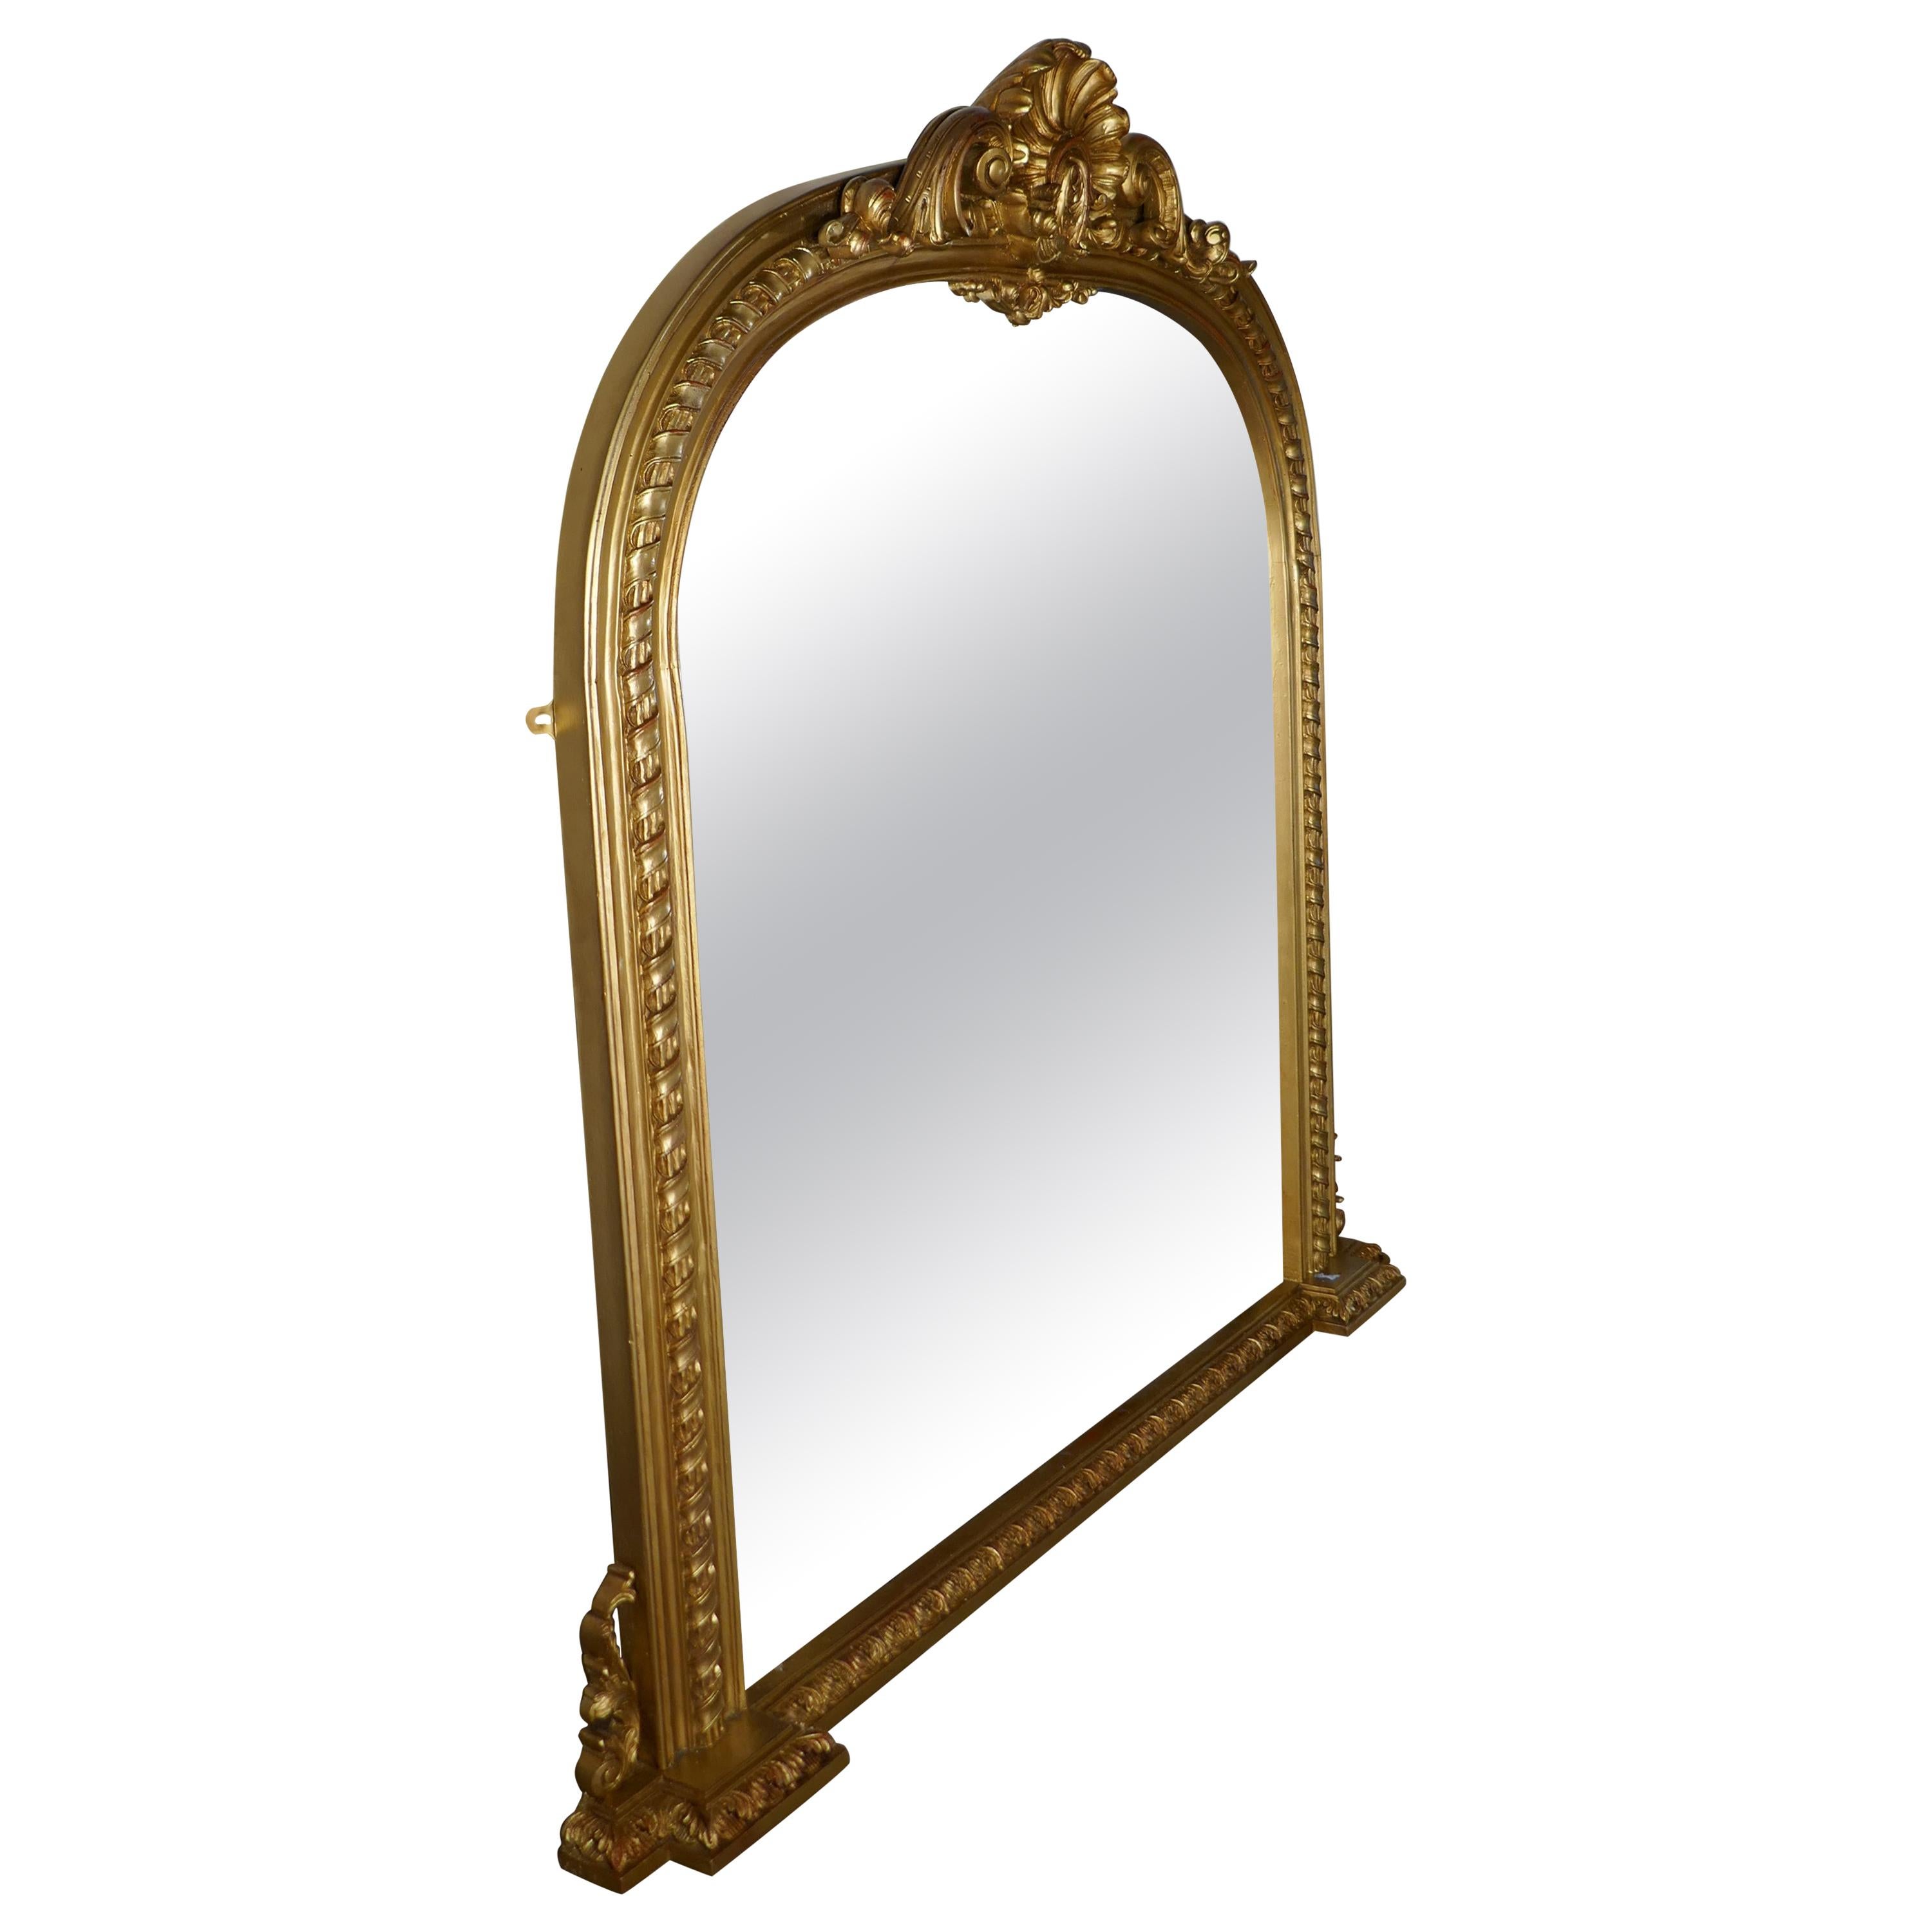 Rare set of 3 large gilt arched Rococo over mantle mirrors 

These mirrors have beautiful Rococo gilt frames they are elaborately decorated with a shell motif at the top and swags of acanthus leaves and ribbons
The large arched frames are in good